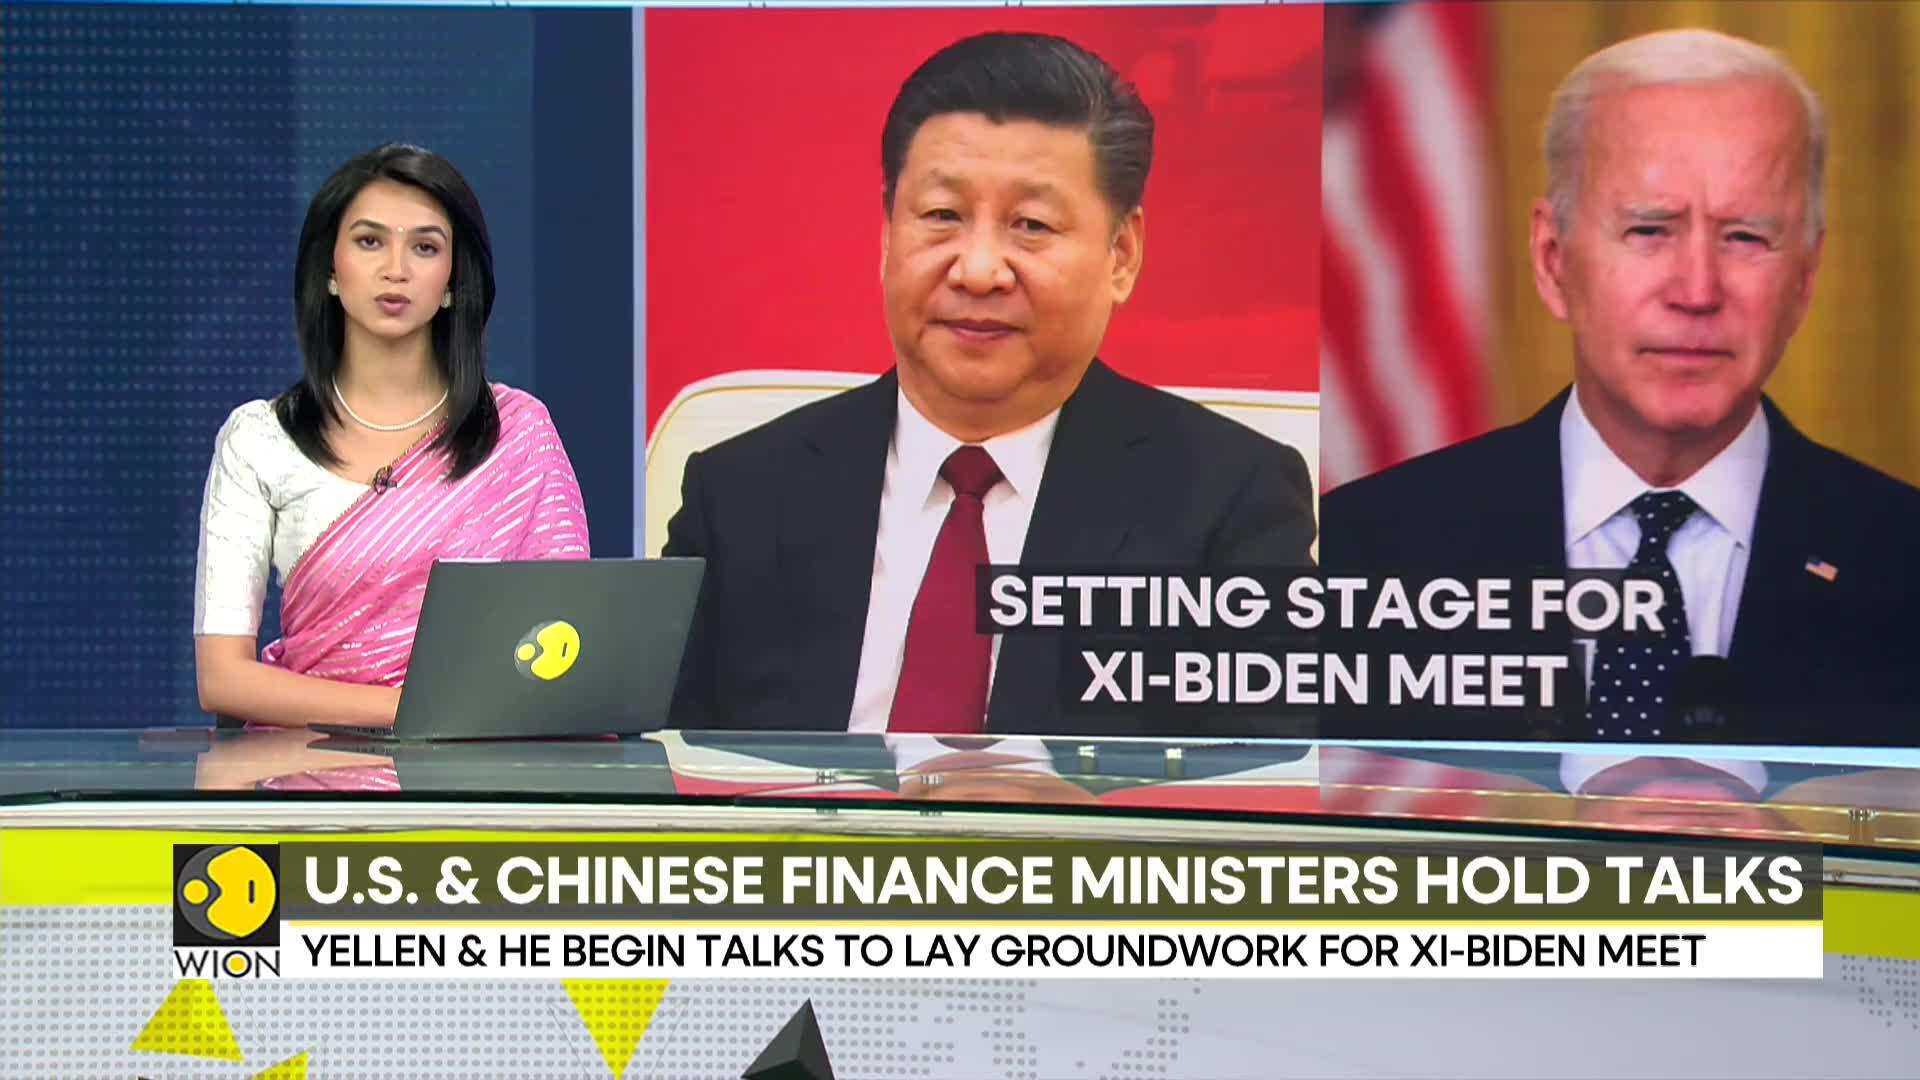 US & Chinese finance ministers hold talks, setting stage for Xi-Biden meet